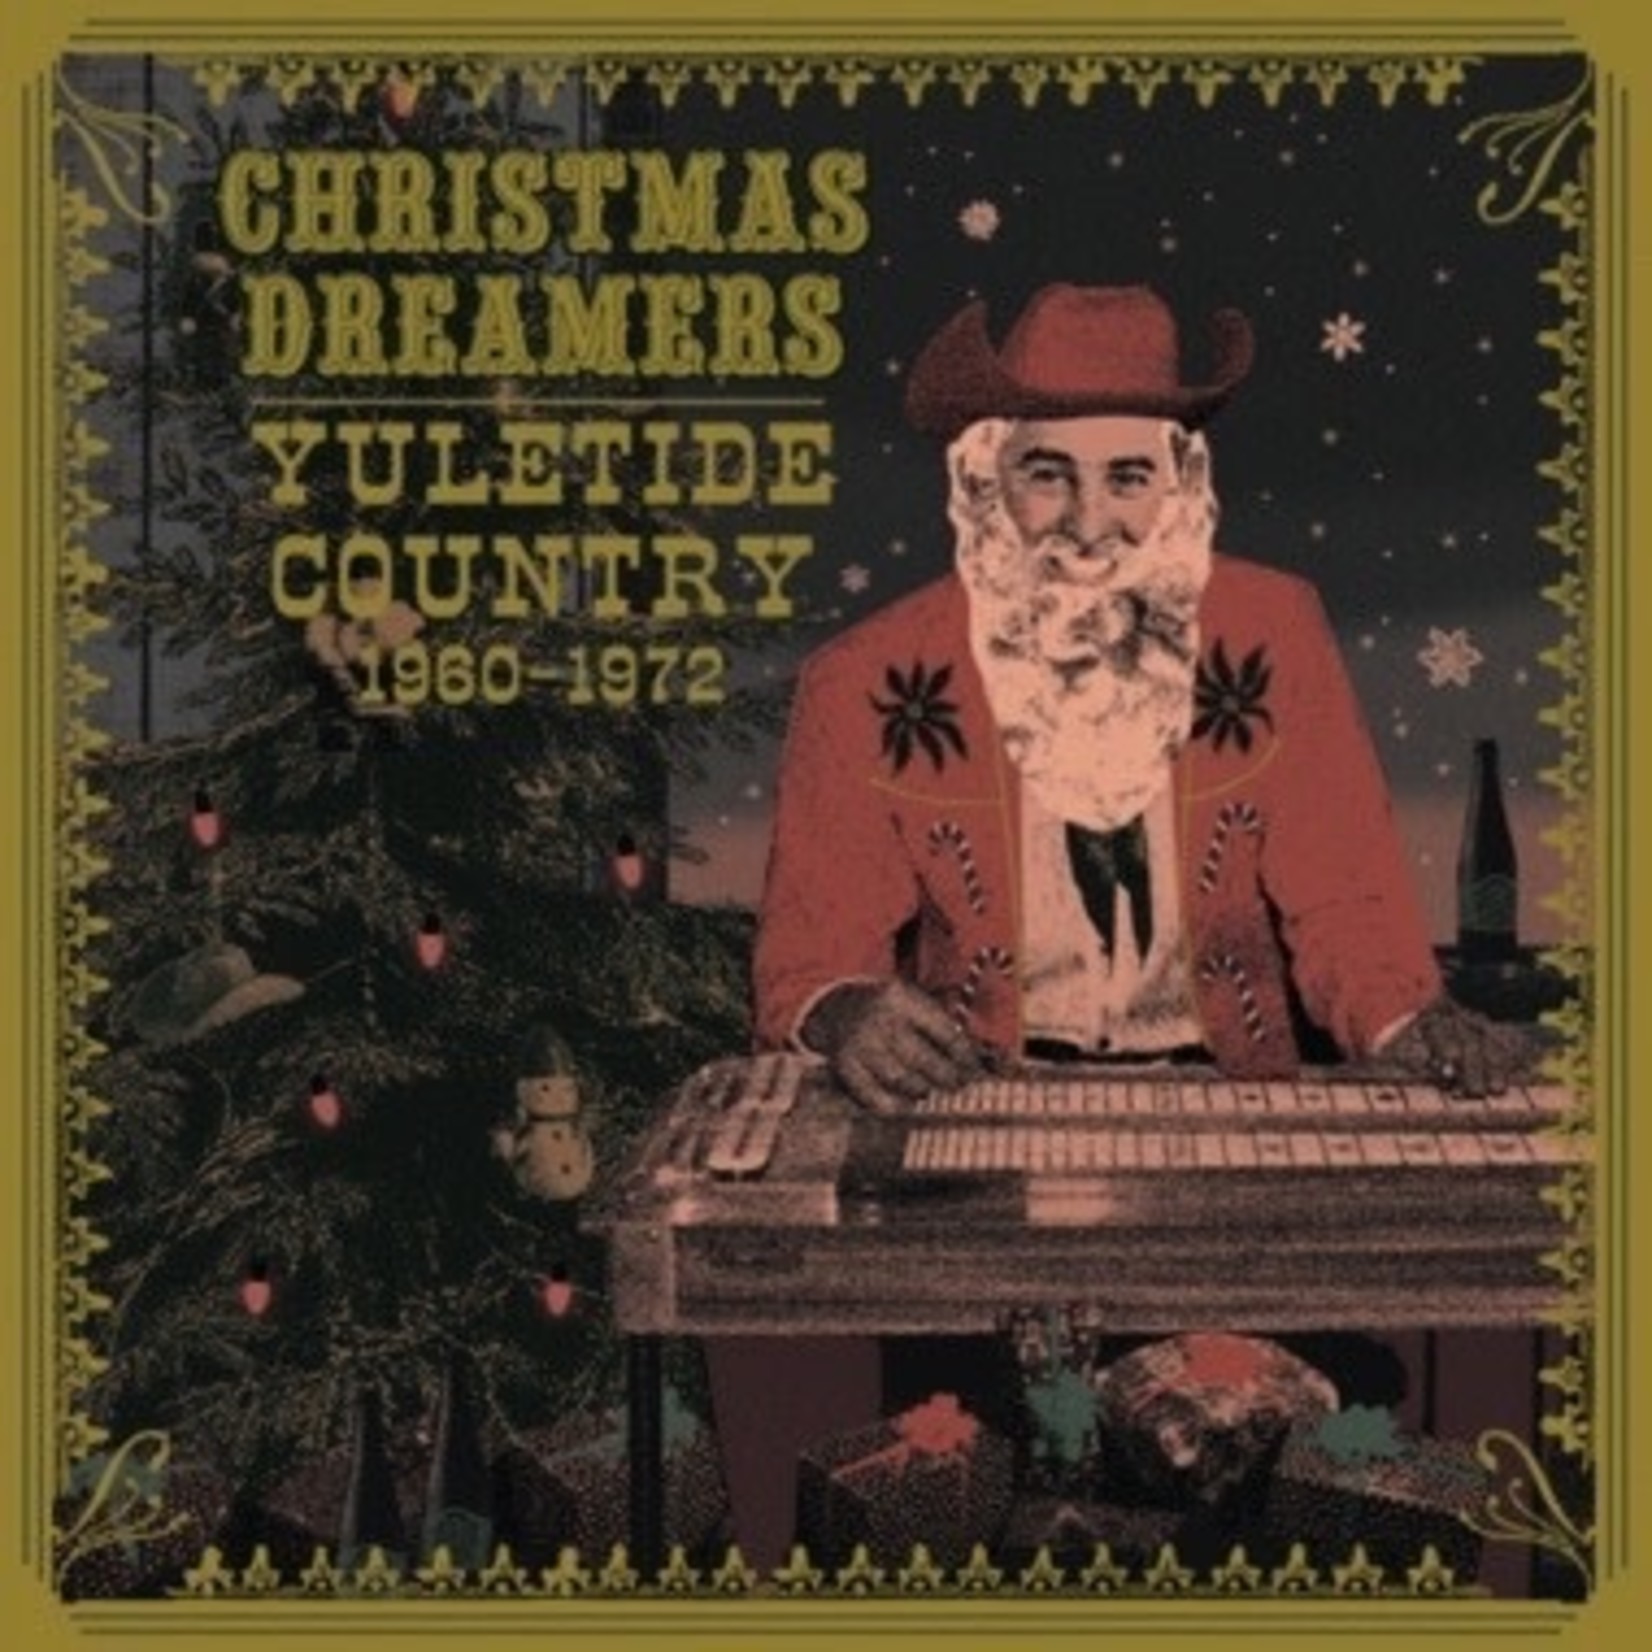 Numero Group V/A - Christmas Dreamers: Yuletide Country 1960-1972  (LP) [Santa's Lager]